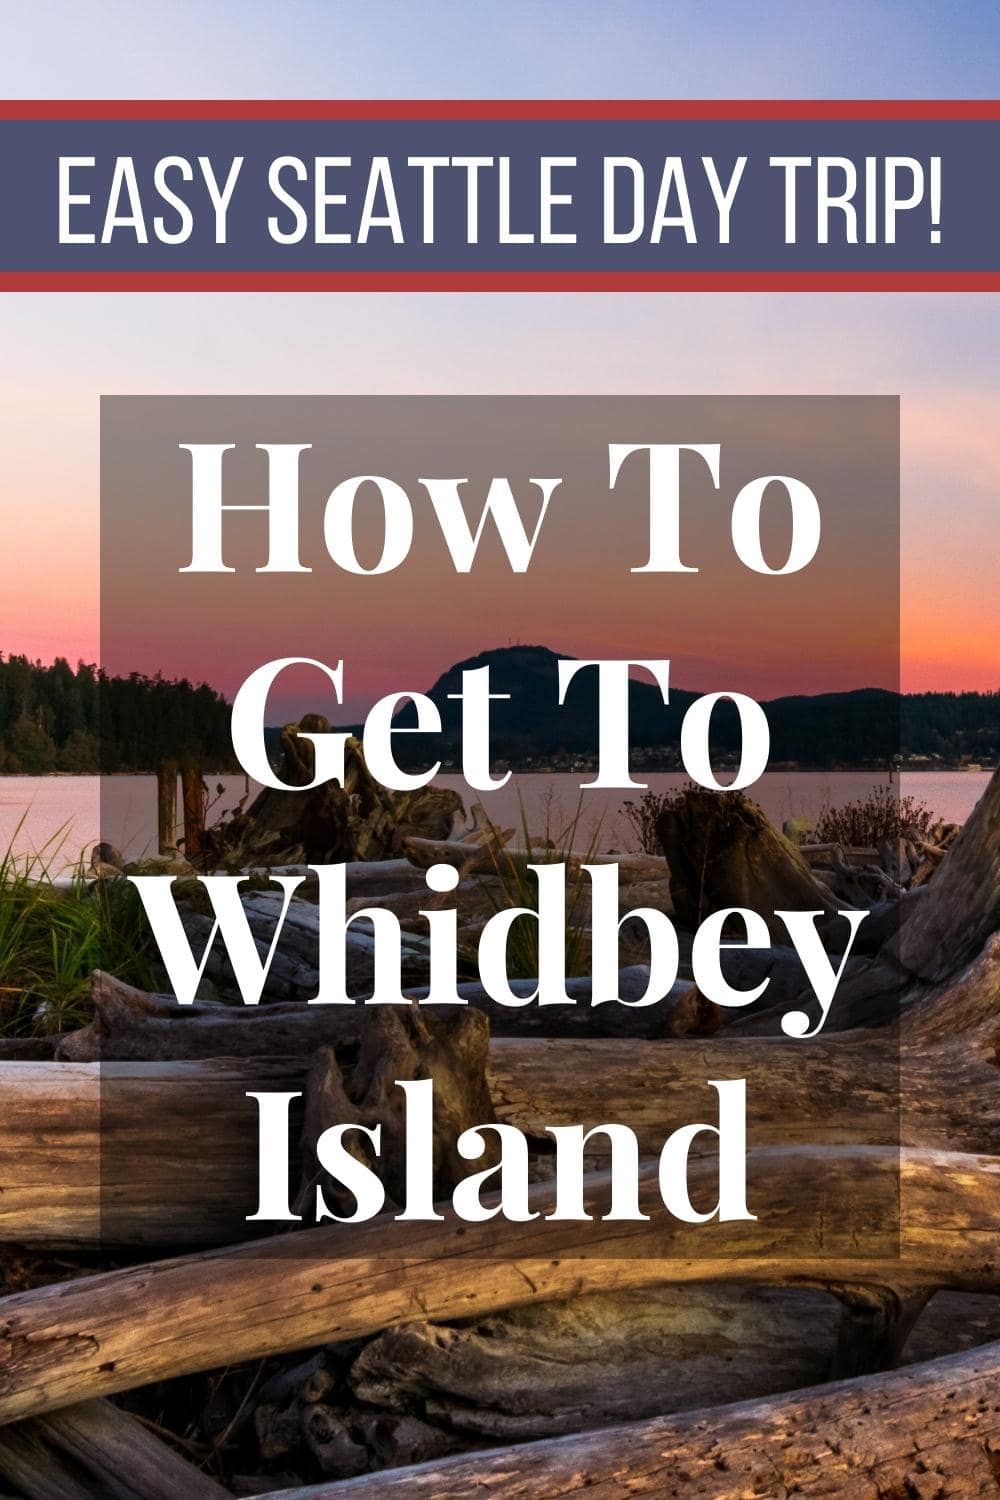 How to Get to Whidbey Island from Seattle: Quick + Easy!